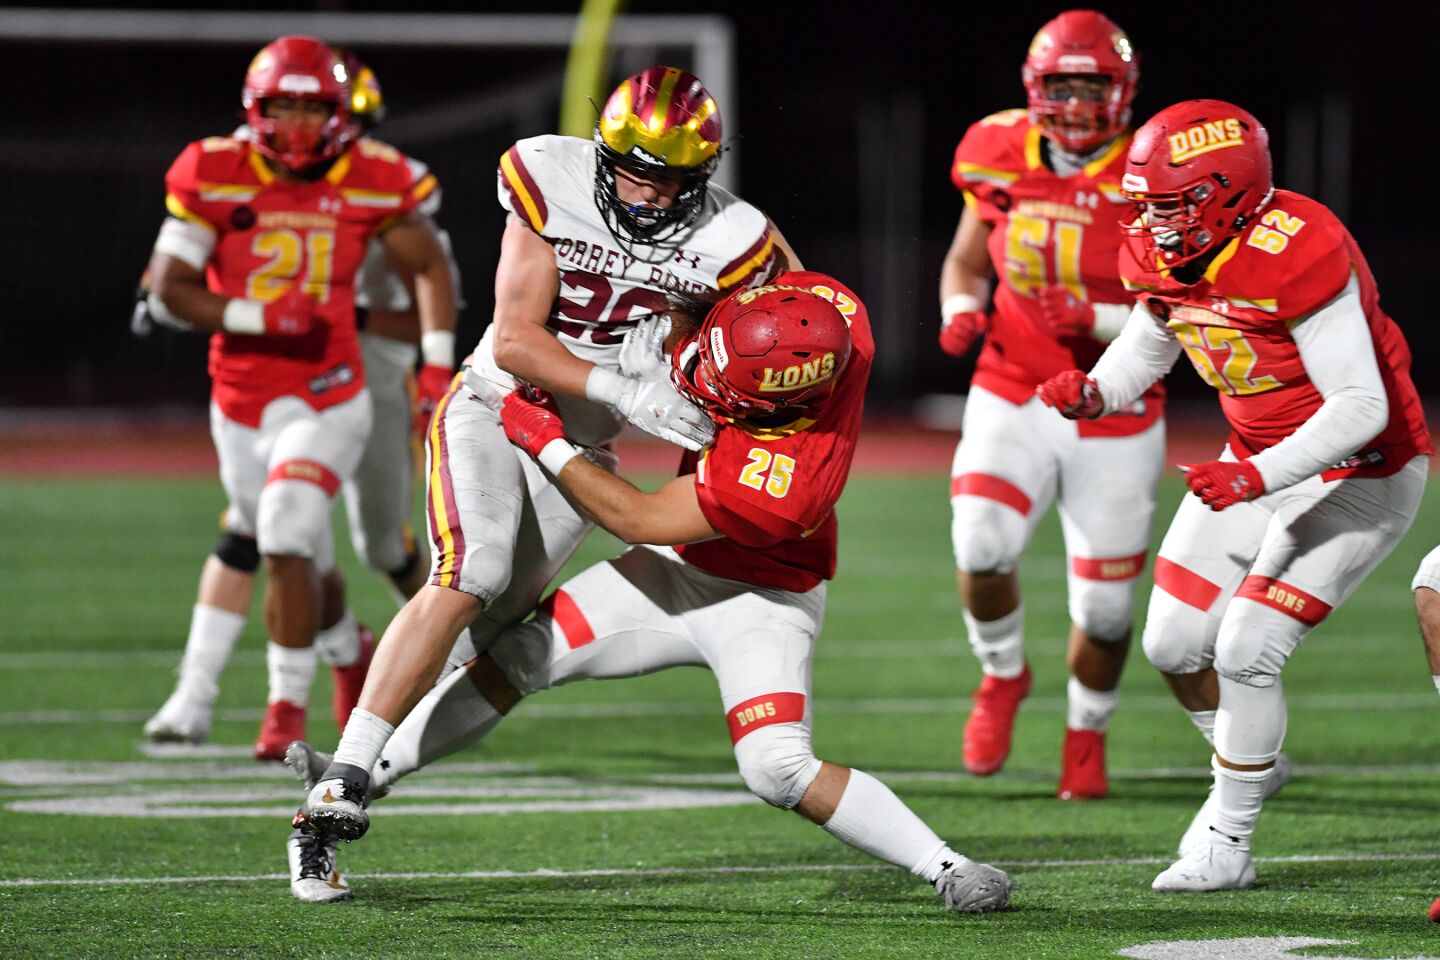 Torrey Pines linebacker Marco Notarainni played both ways, finishing with eight carries for 36 yards and three receptions for 26 yards on offense.